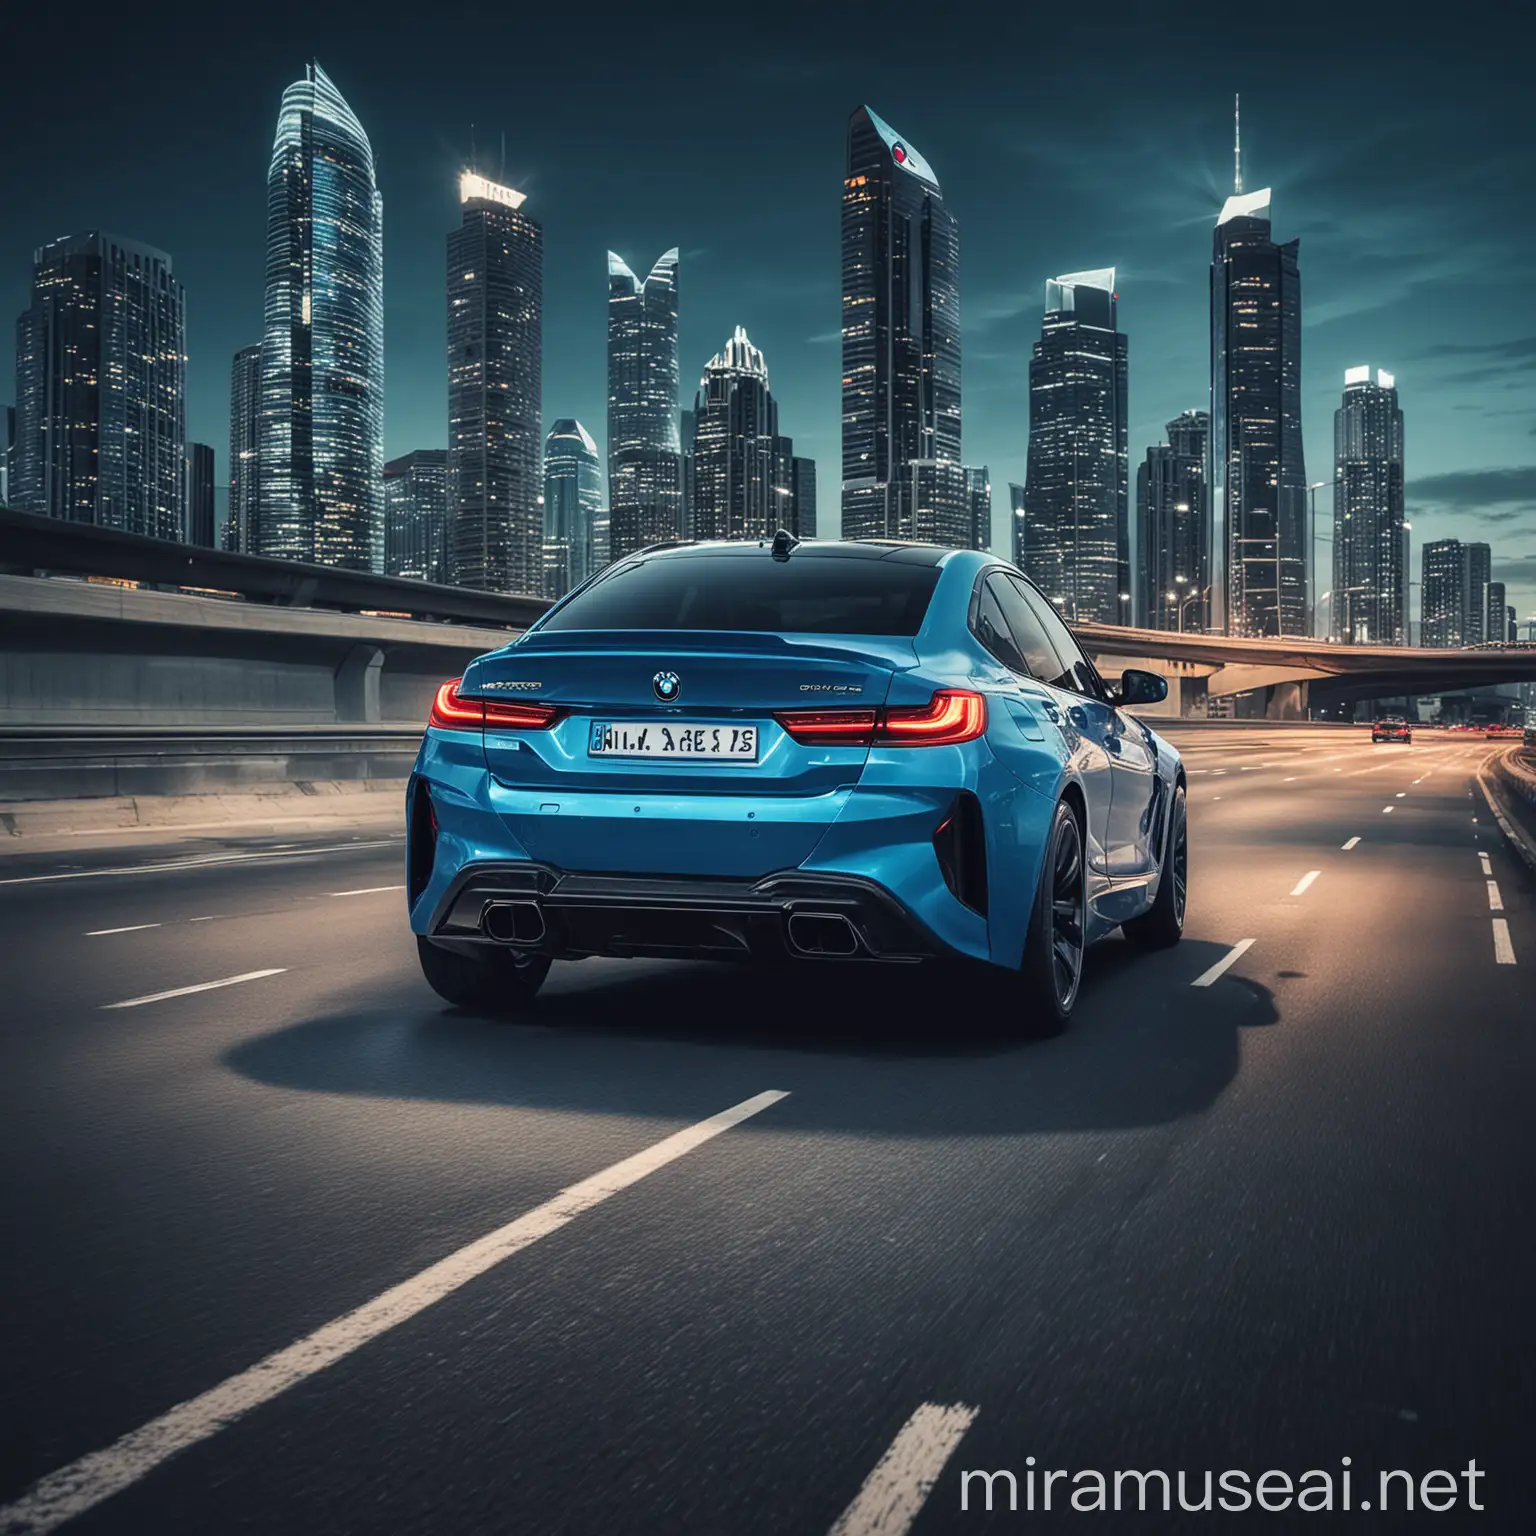 Futuristic photo of BMW car on the highway go to downtown, high rise building in the background, BLUE color and light